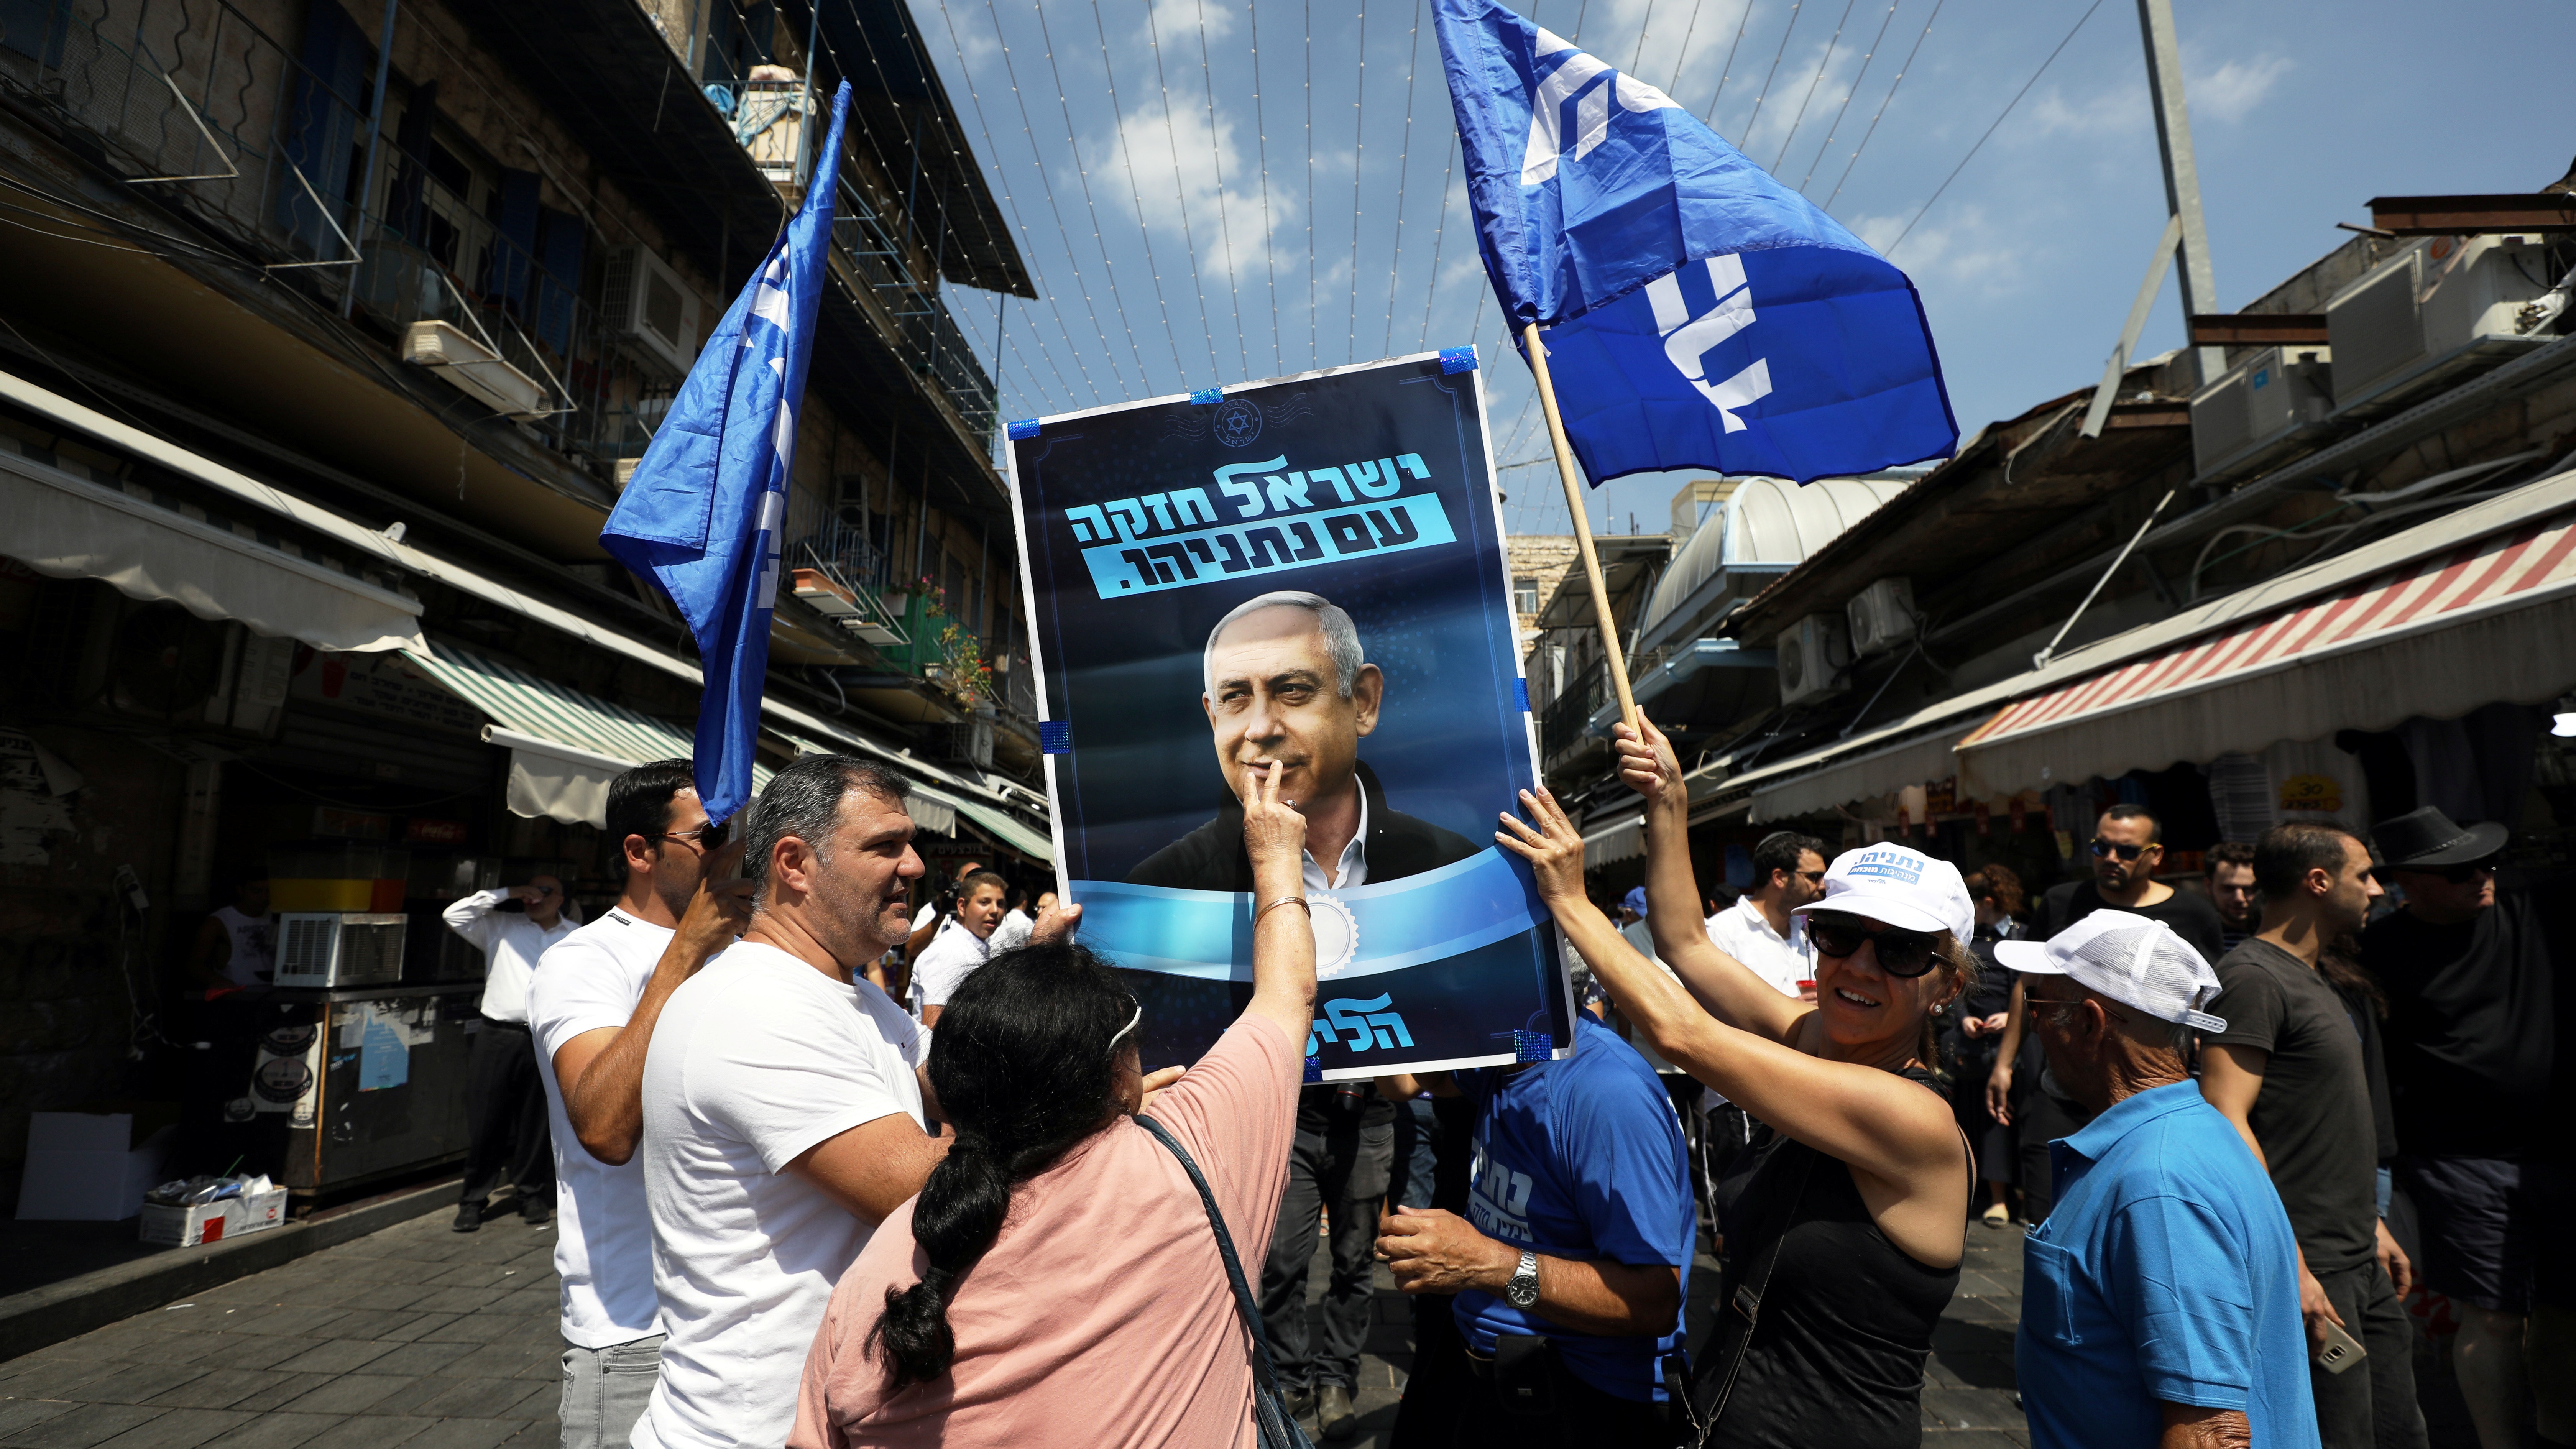 A supporter of the Israeli Likud party kisses an election campaign poster depicting Israel Prime minister Benjamin Netanyahu at the market in Jerusalem.